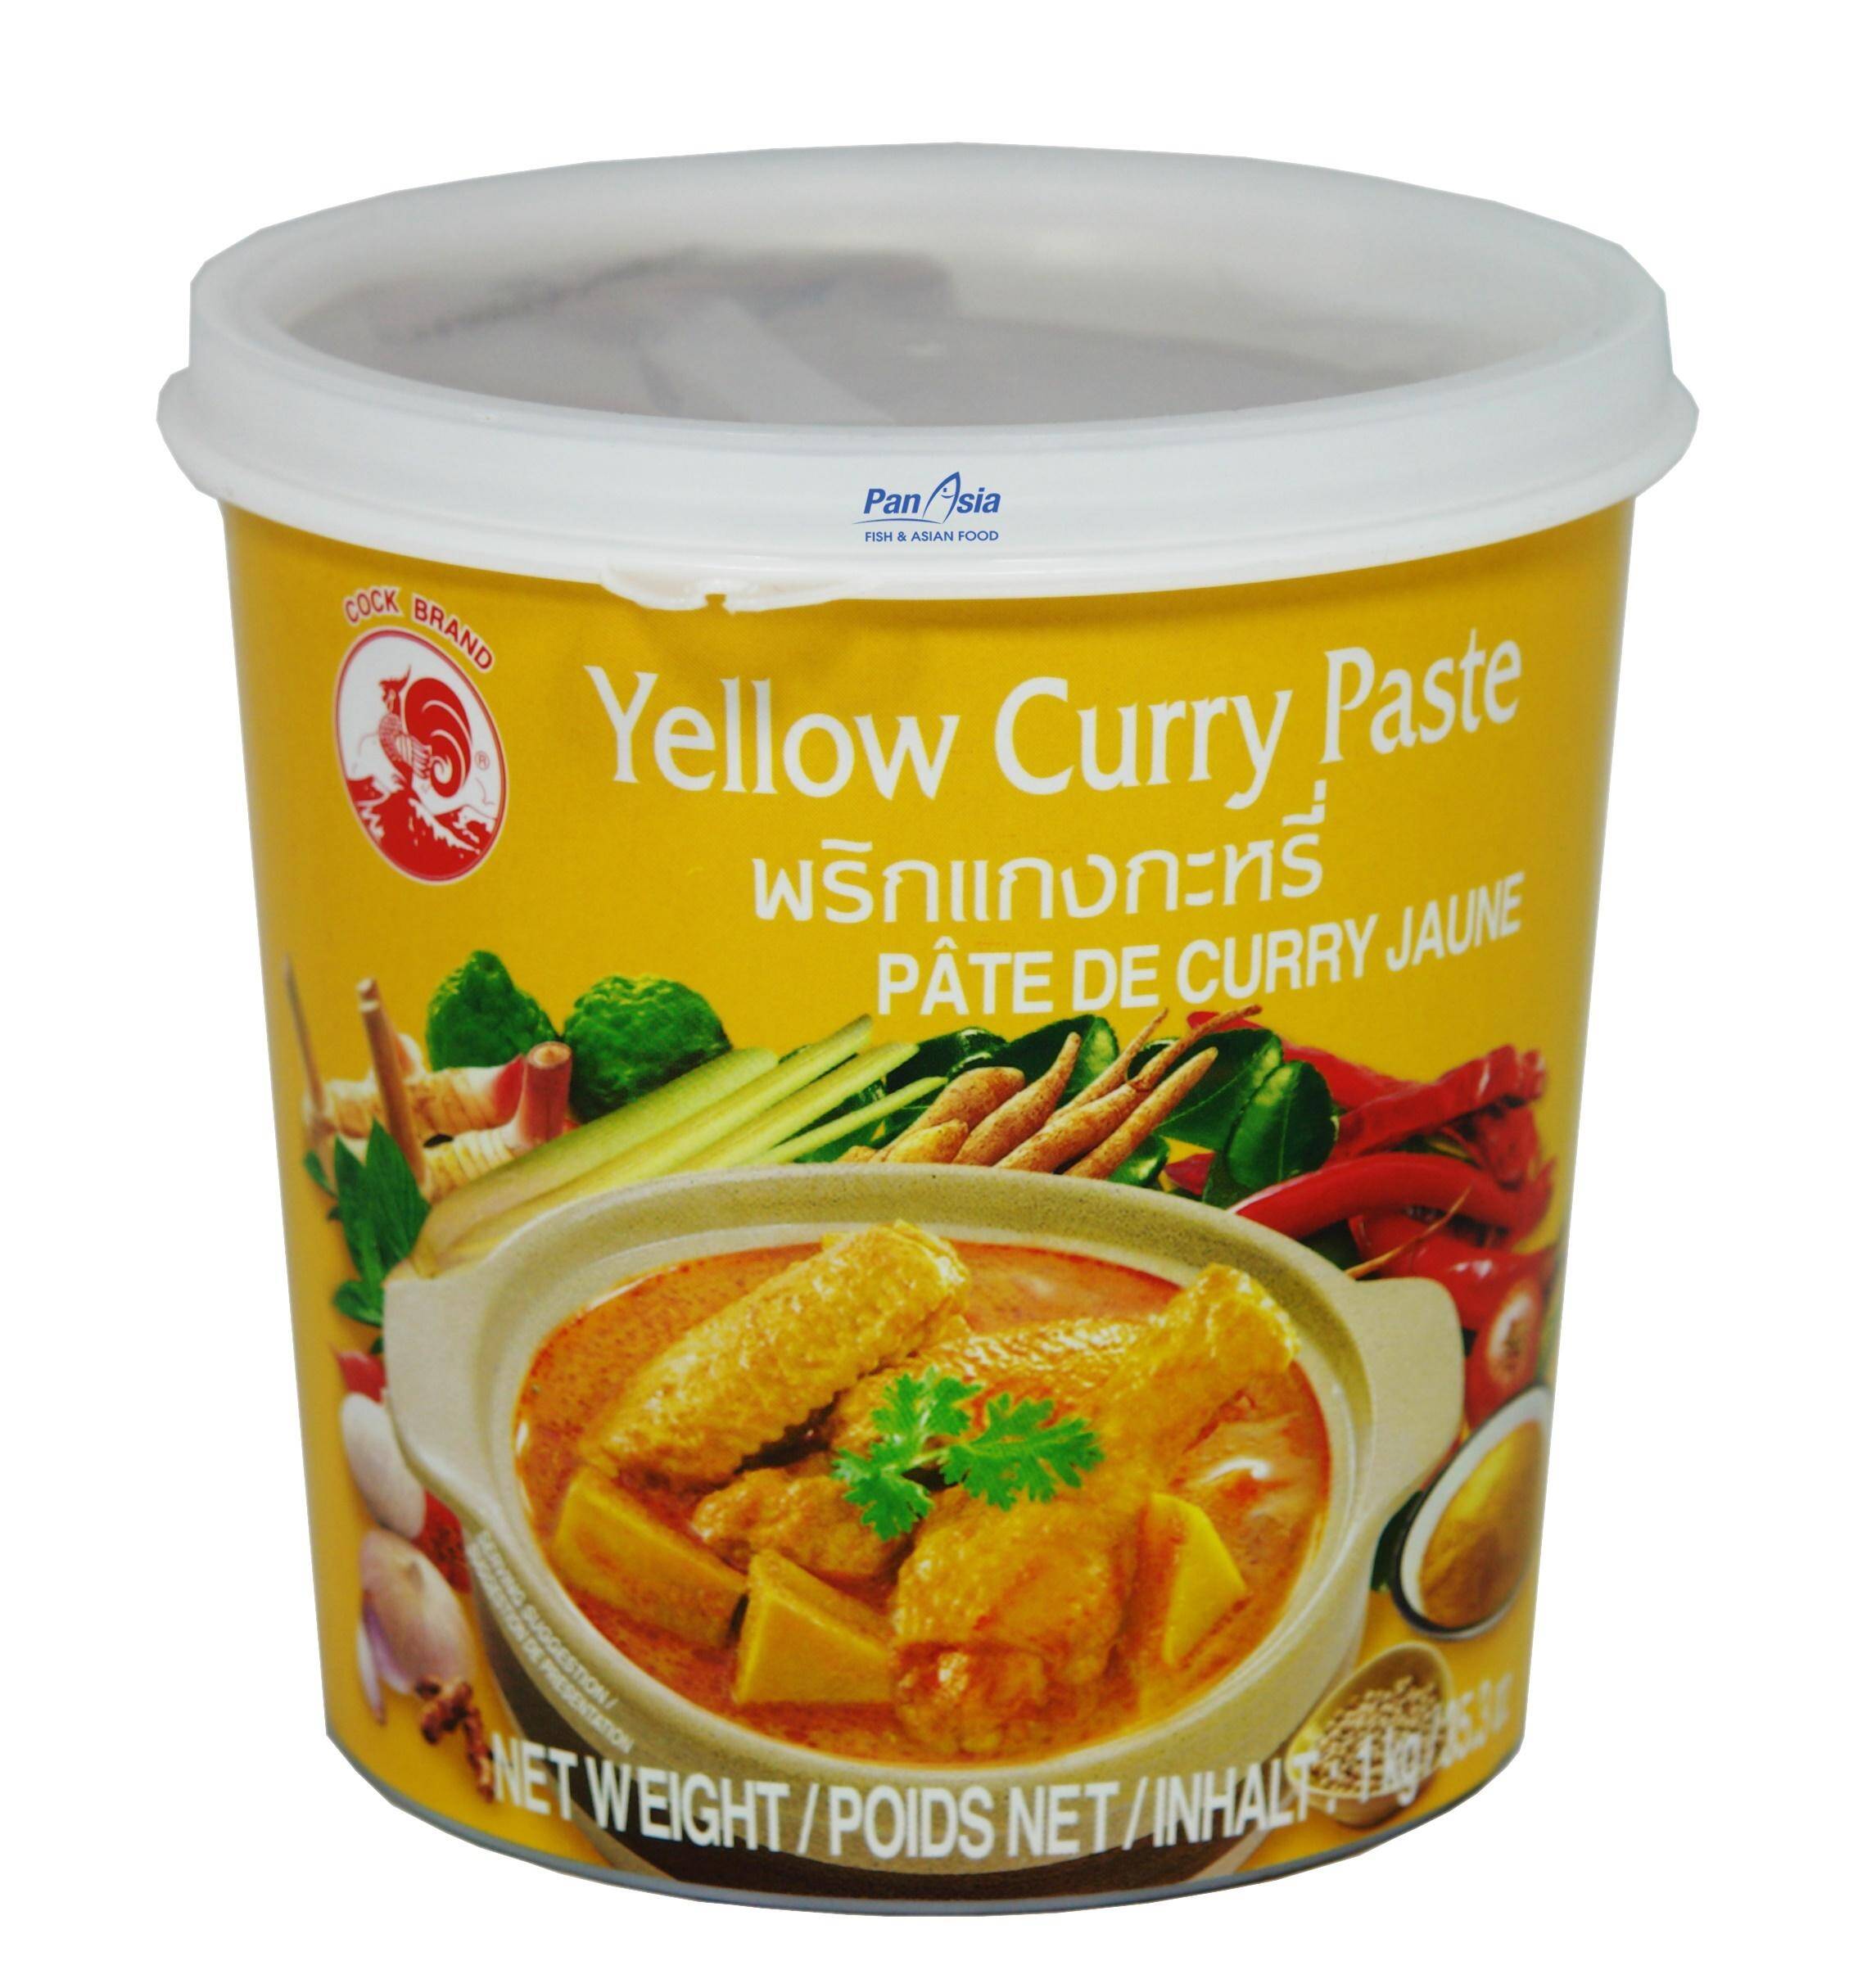 Yellow Curry Pasta 1kg